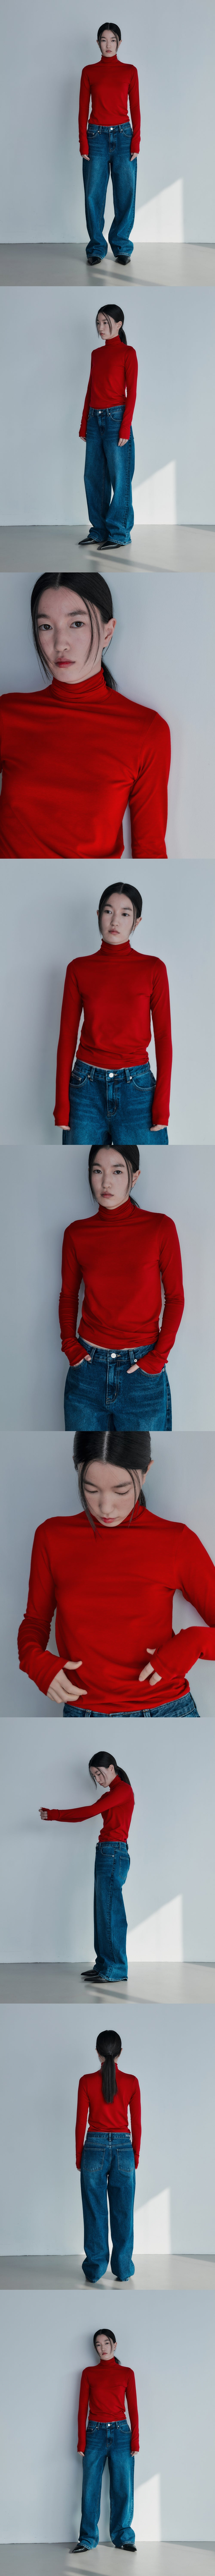 WINTER TURTLENECK T-SHIRTS (RED)